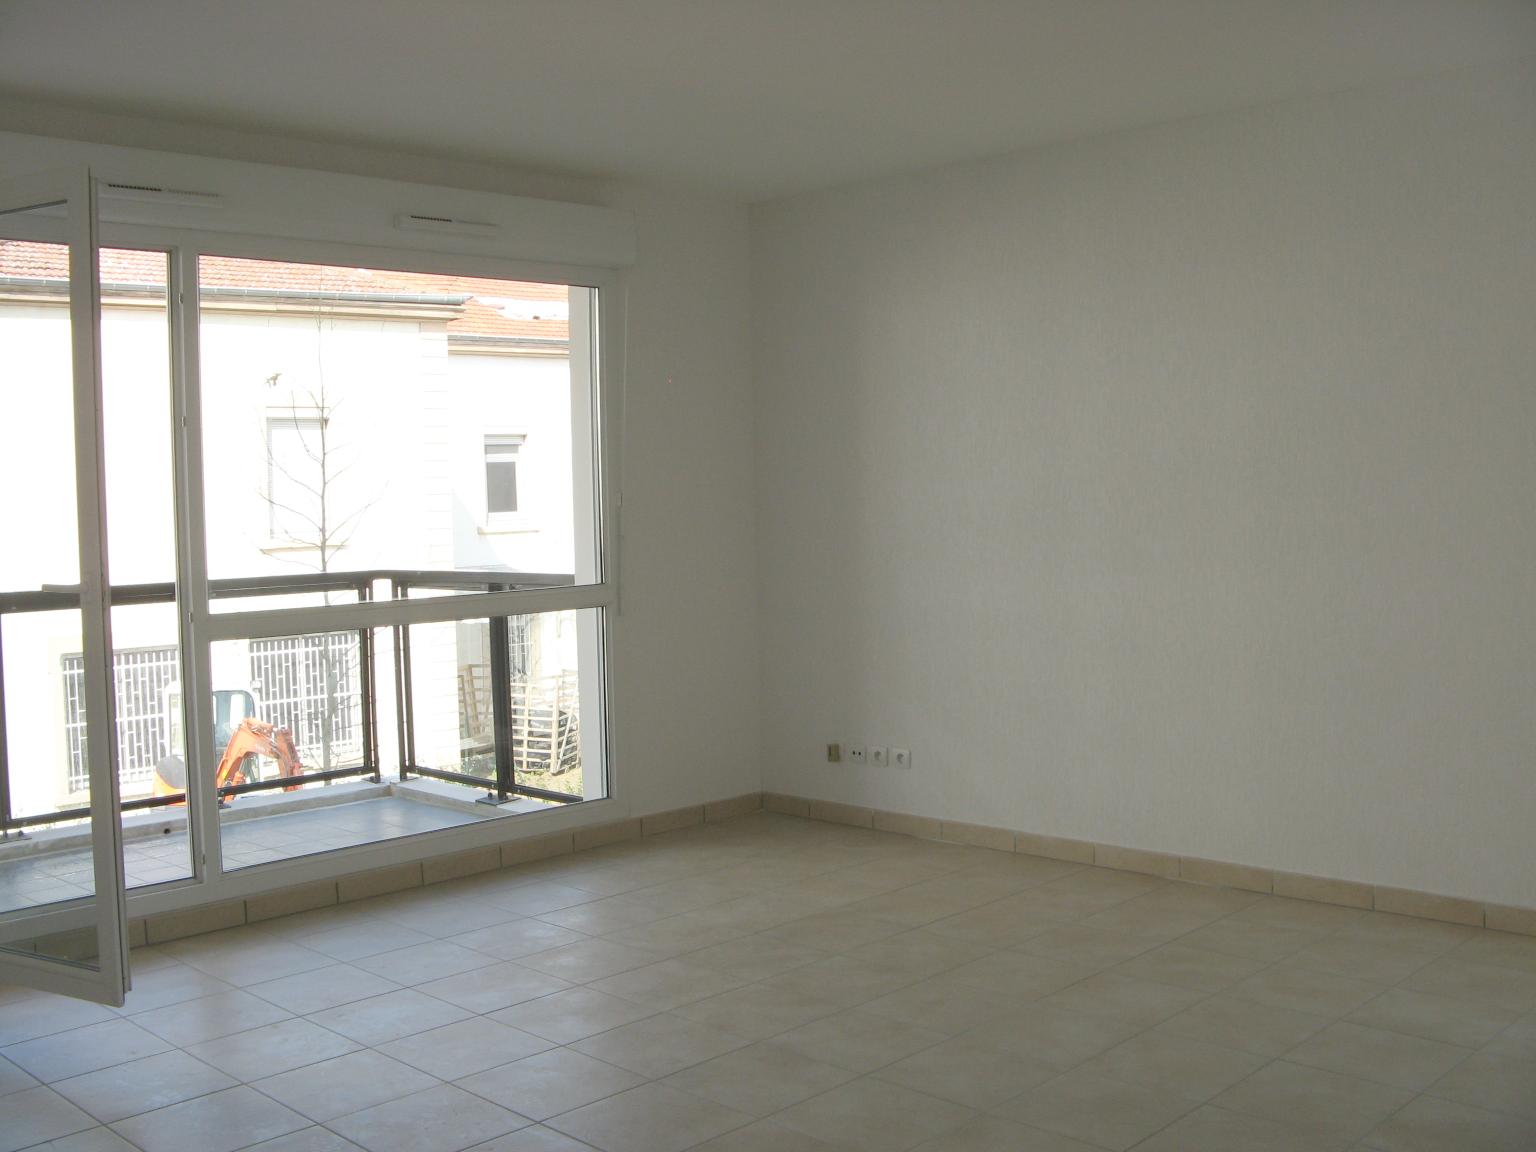 [my apartment: empty living room (before moving), North-West]